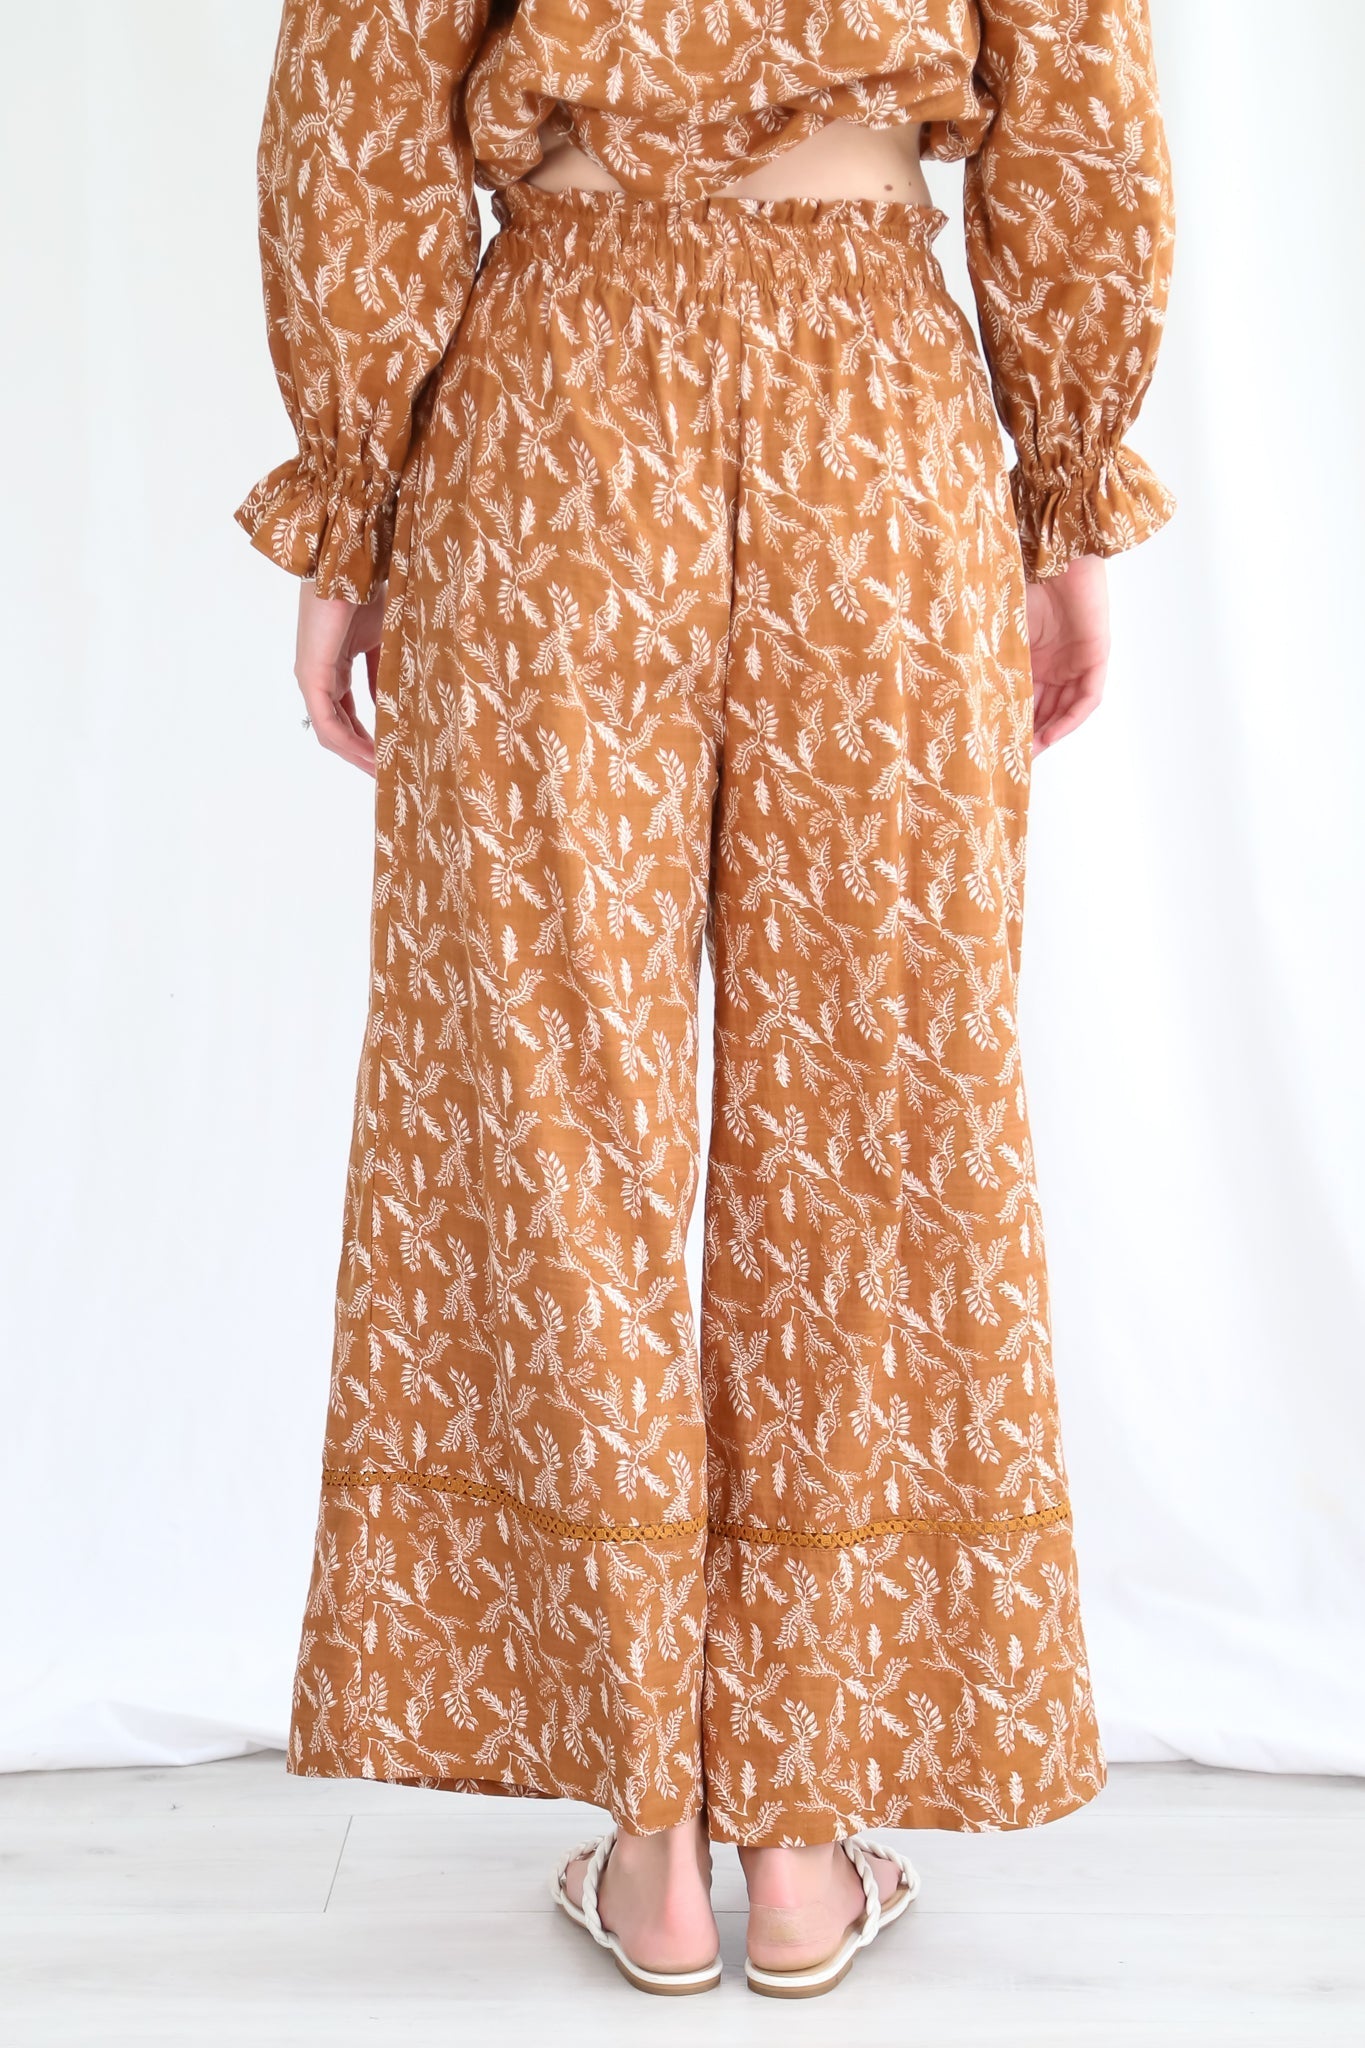 Sable Pants - Bamboo Cotton Wide Leg Pants with Splicing Detail in Tan